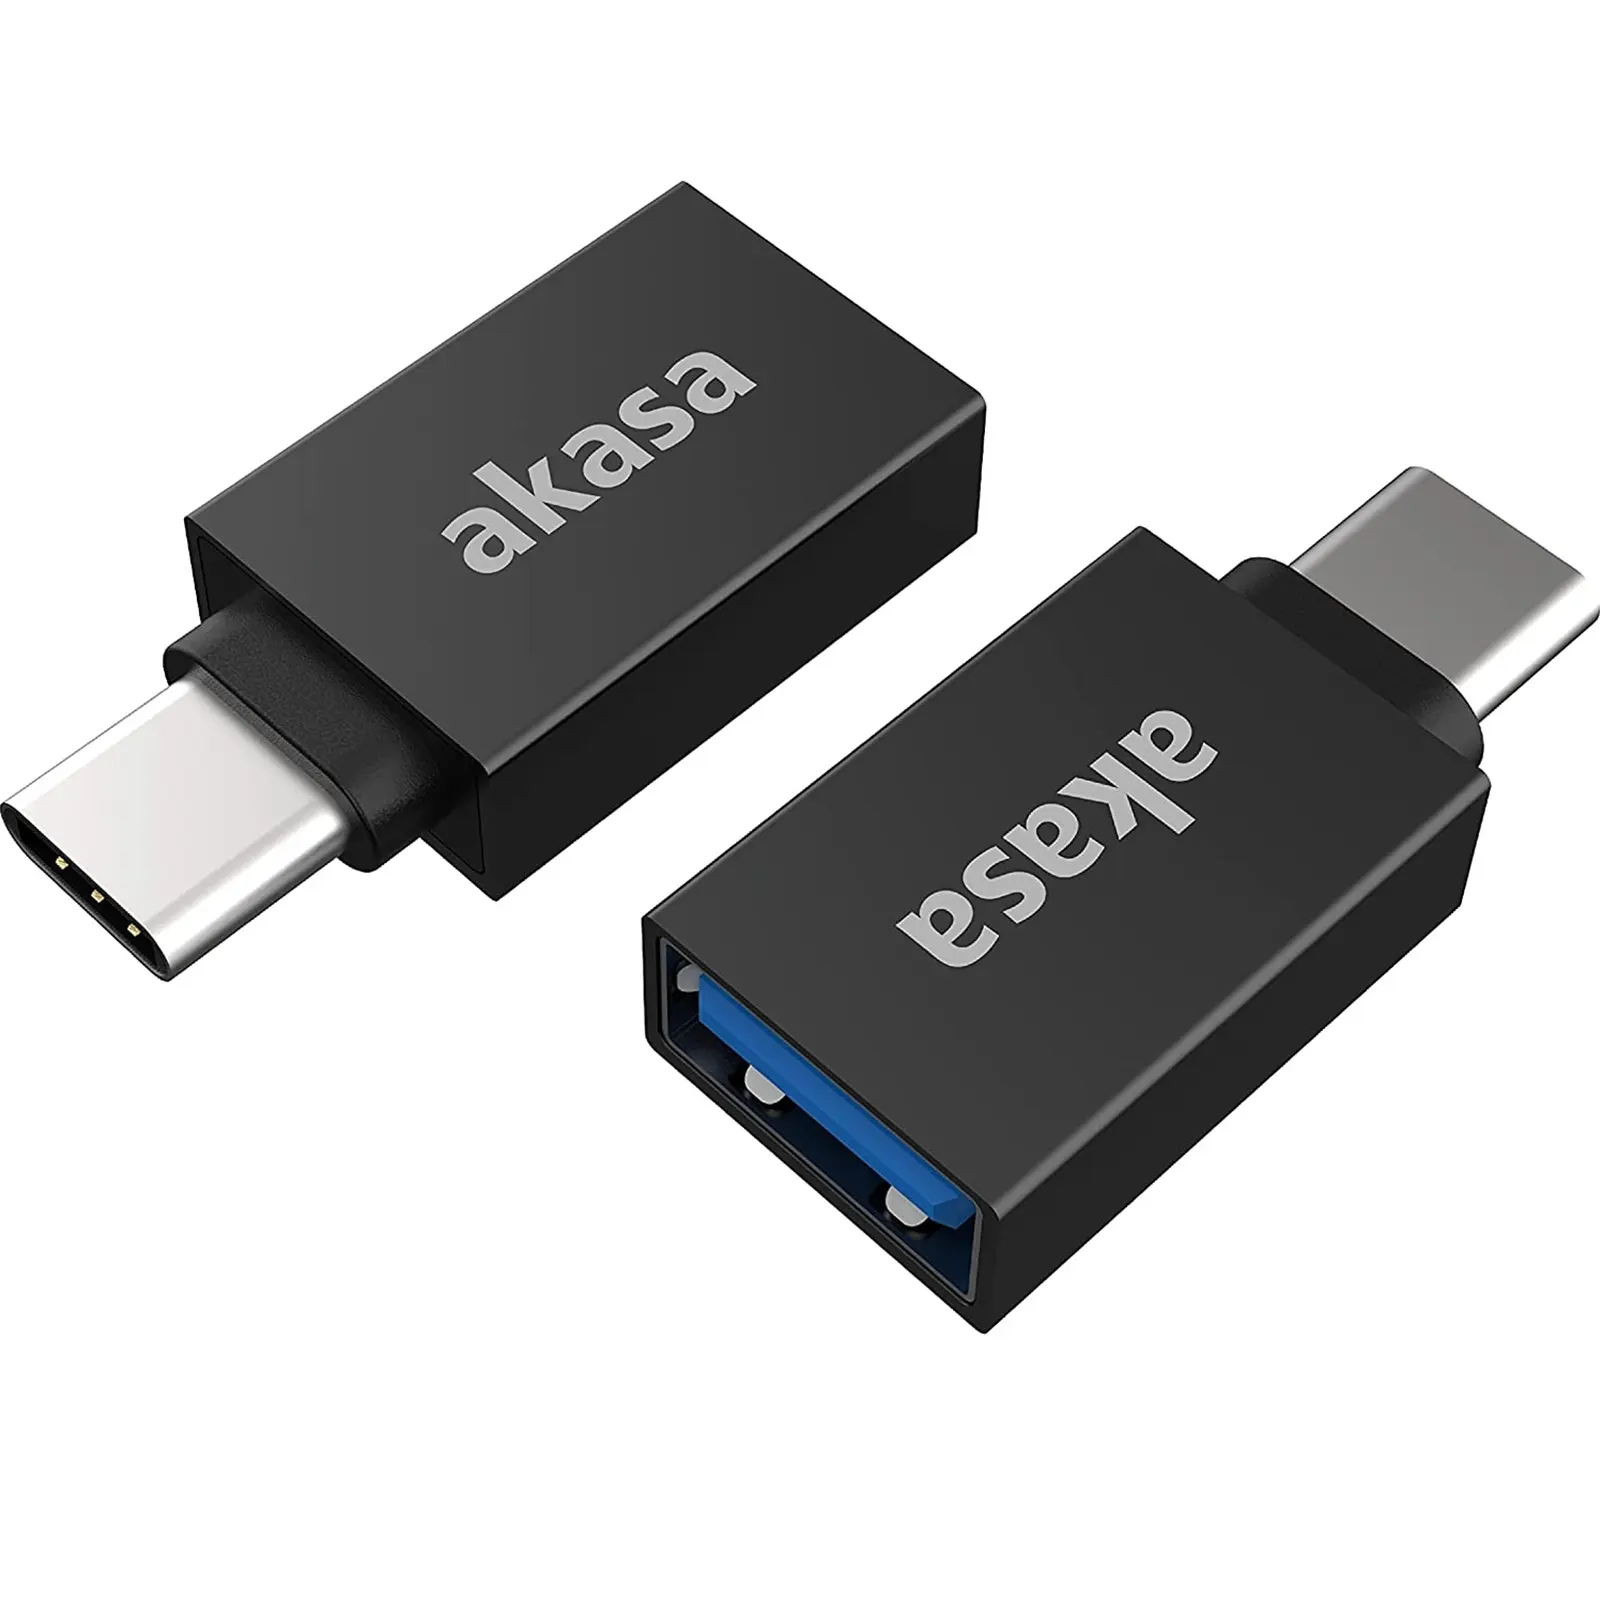 AKASA AK-CBUB62-KT02 Data Adapter, USB 3.2 Gen 2 Type-C (M) to USB 3.2 Gen 2 Type-A (F), Adapter, Black, SuperSpeed USB up to 10Gbps Data, 3A/5V Fast Charging, Pack of 2